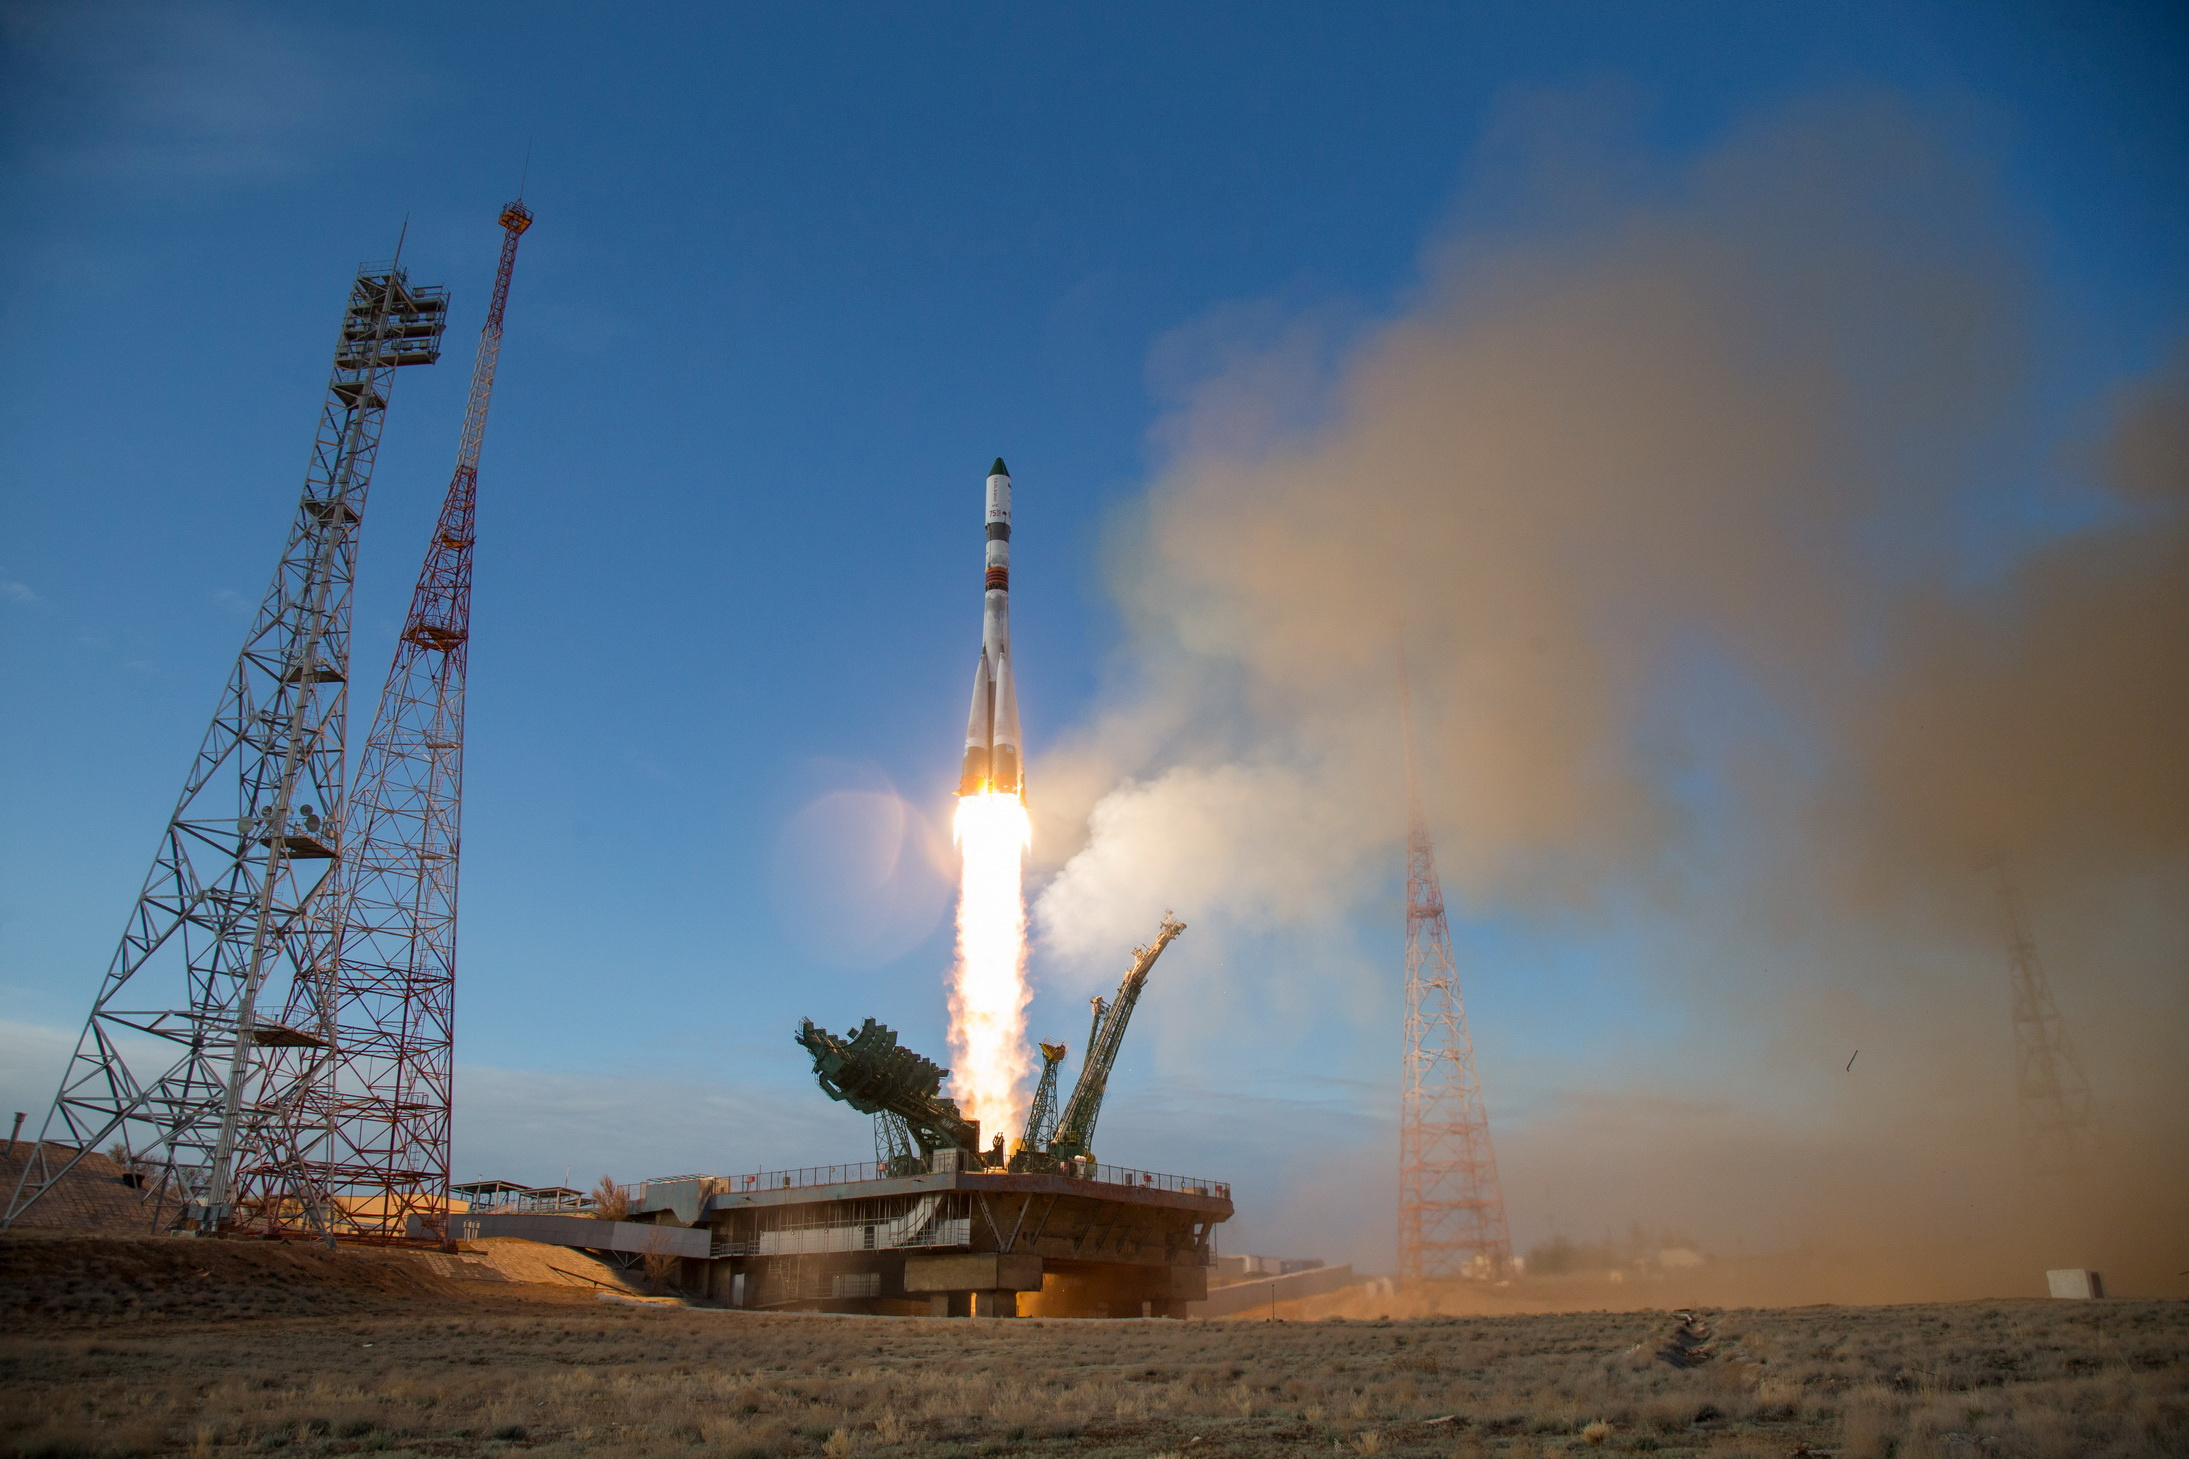 The Soyuz-2.1a carrier rocket with the Progress MS-14 cargo spacecraft blasts off to the International Space Station (ISS) from the launchpad at the Baikonur Cosmodrome